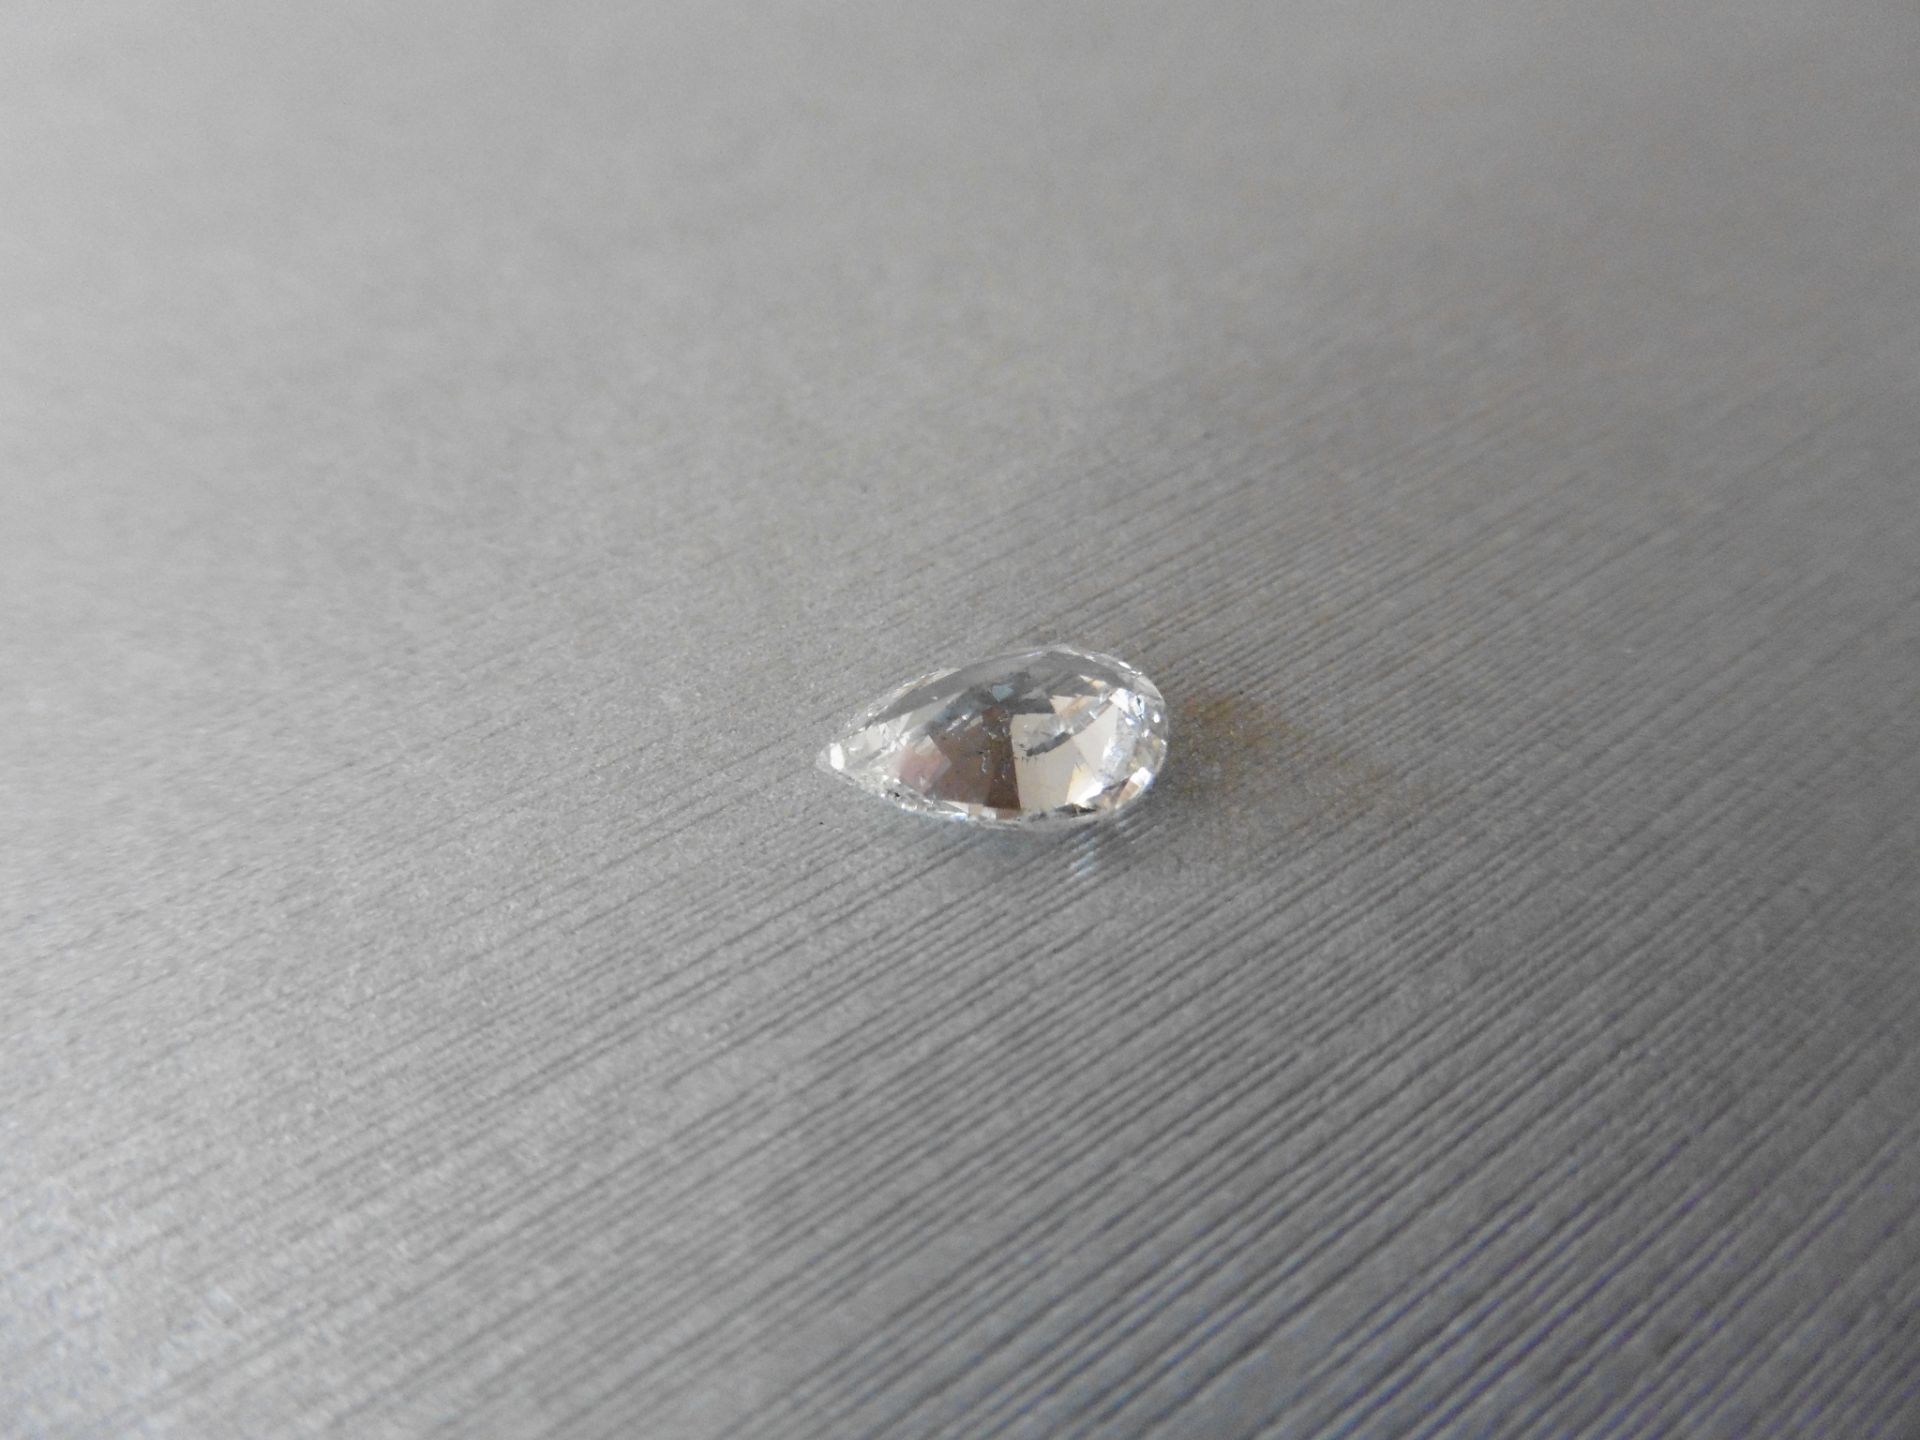 1.70ct single pear cut diamond H colour S12 clarity. 9.96 x 6.66 x 4.09. Suitable for mounting in - Image 2 of 5